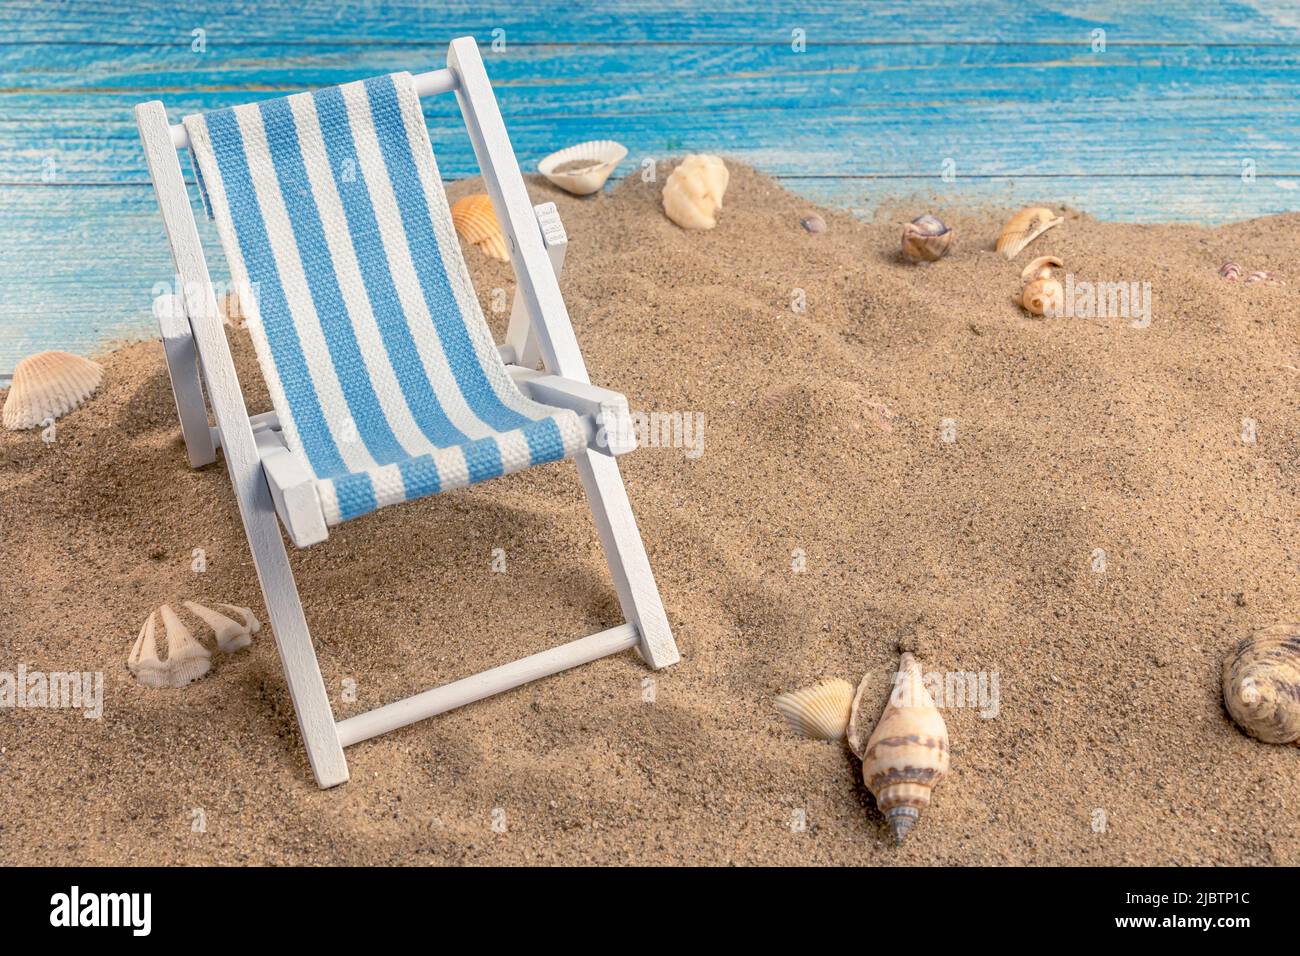 Seashells on the sand on a blue background. Summer vacation, beach, relaxation, sea, ocean, travel concept. Stock Photo